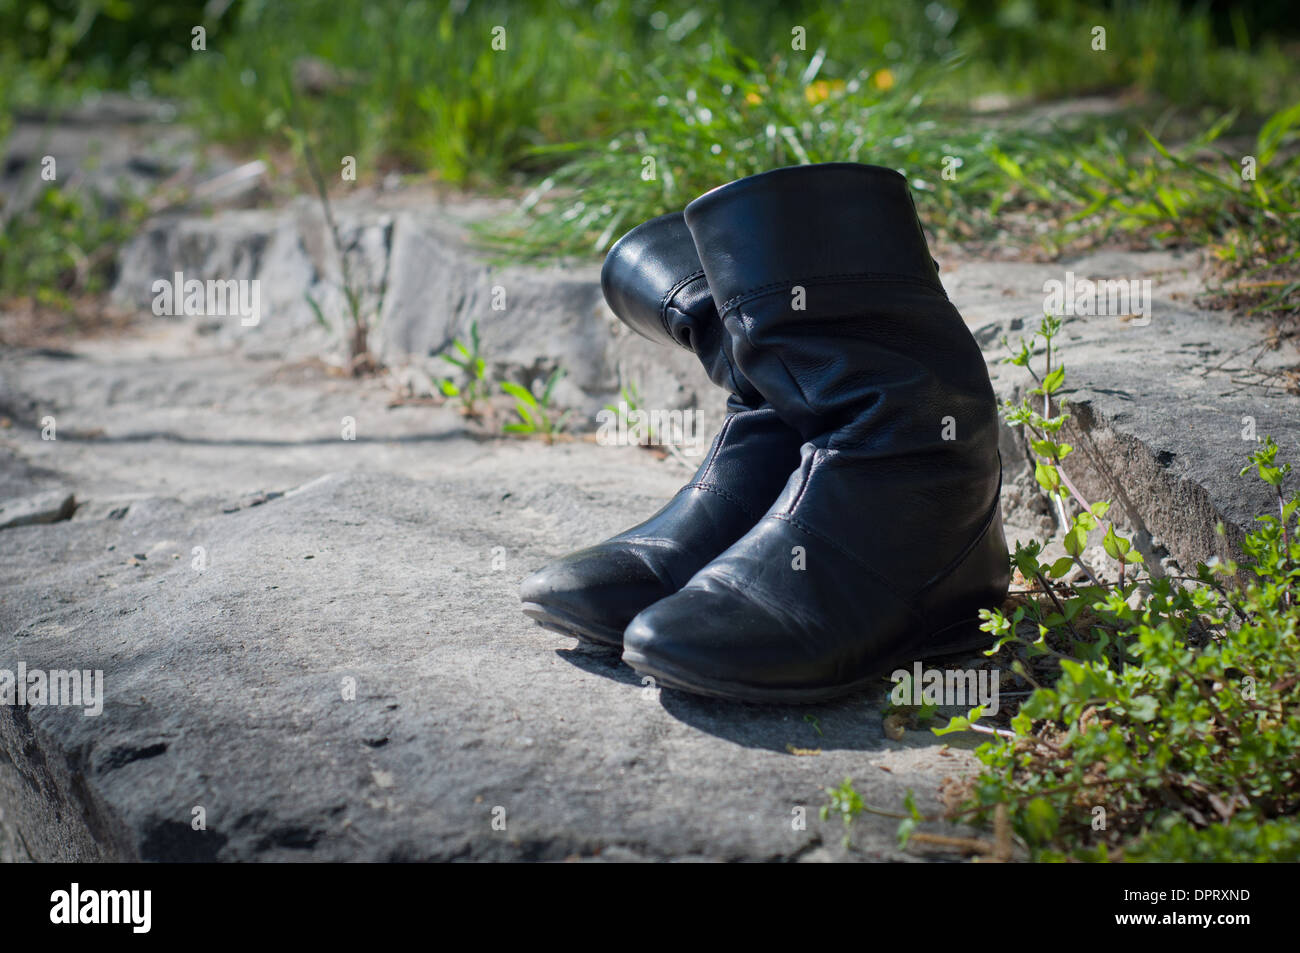 black boots stand among stones and green foliage under bright beams of the sun Stock Photo